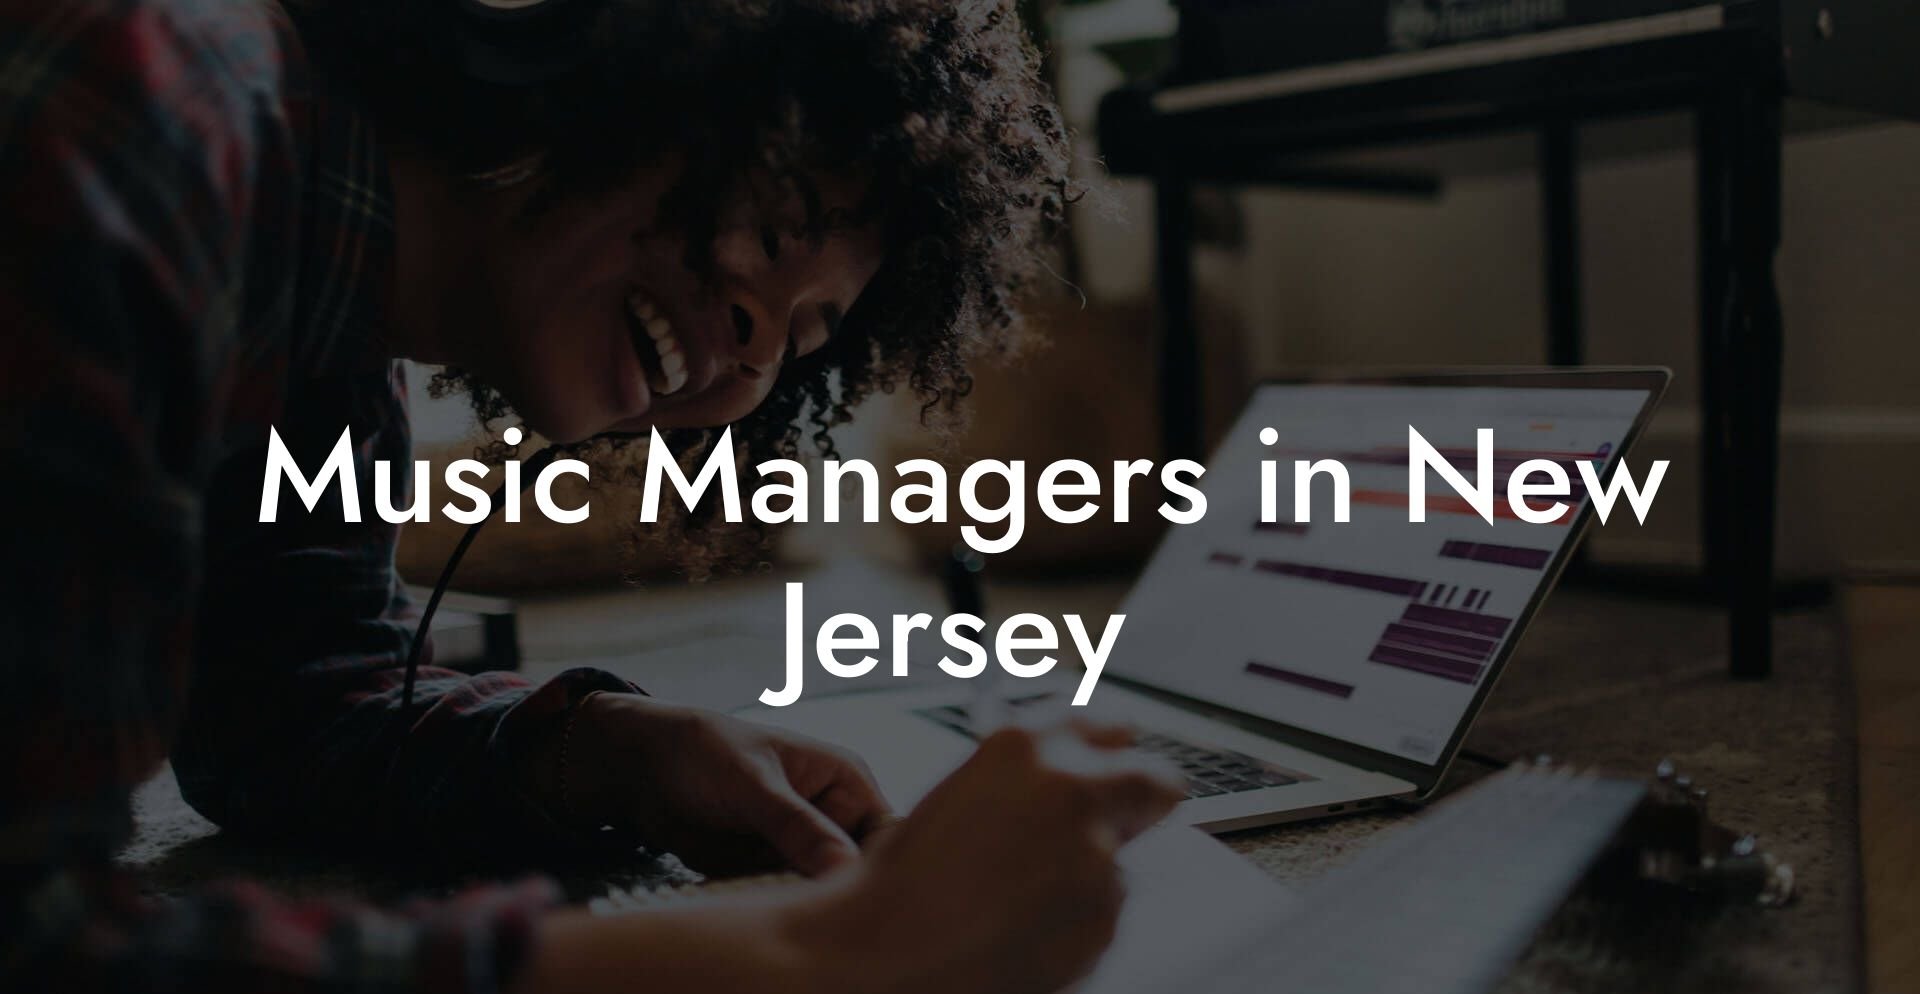 Music Managers in New Jersey